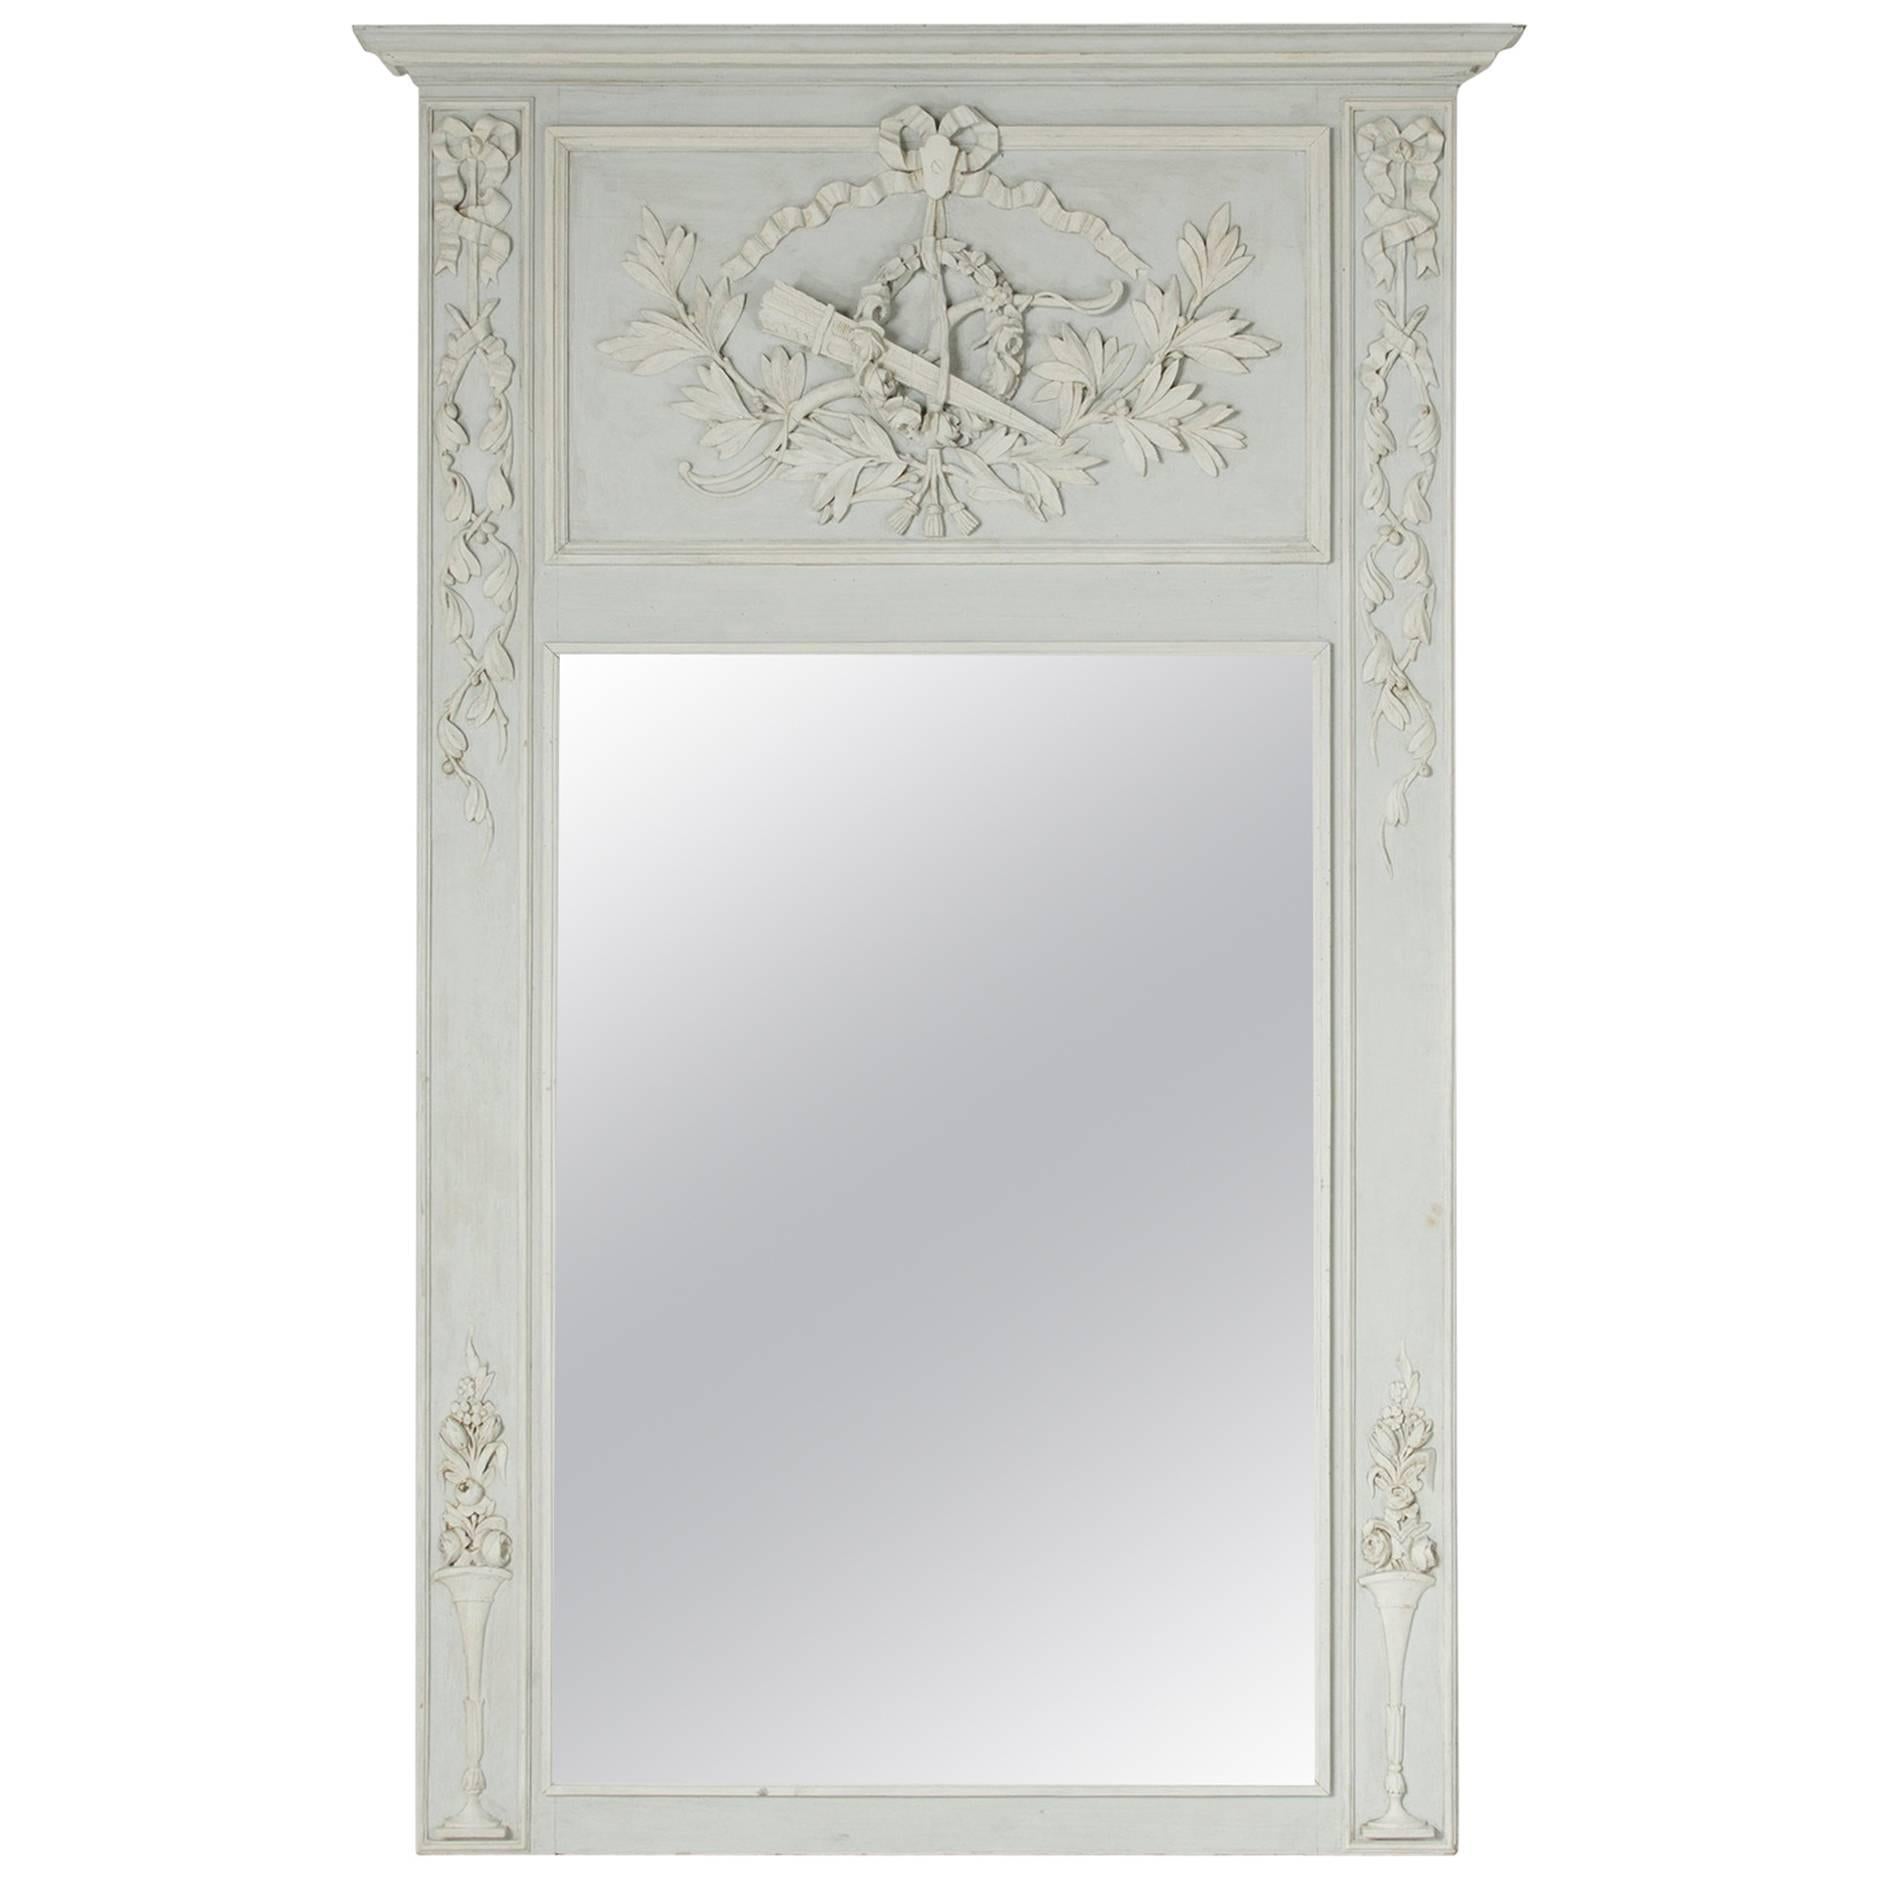 Grand 19th Century Carved and Painted Louis XVI Style Trumeau or Mantel Mirror